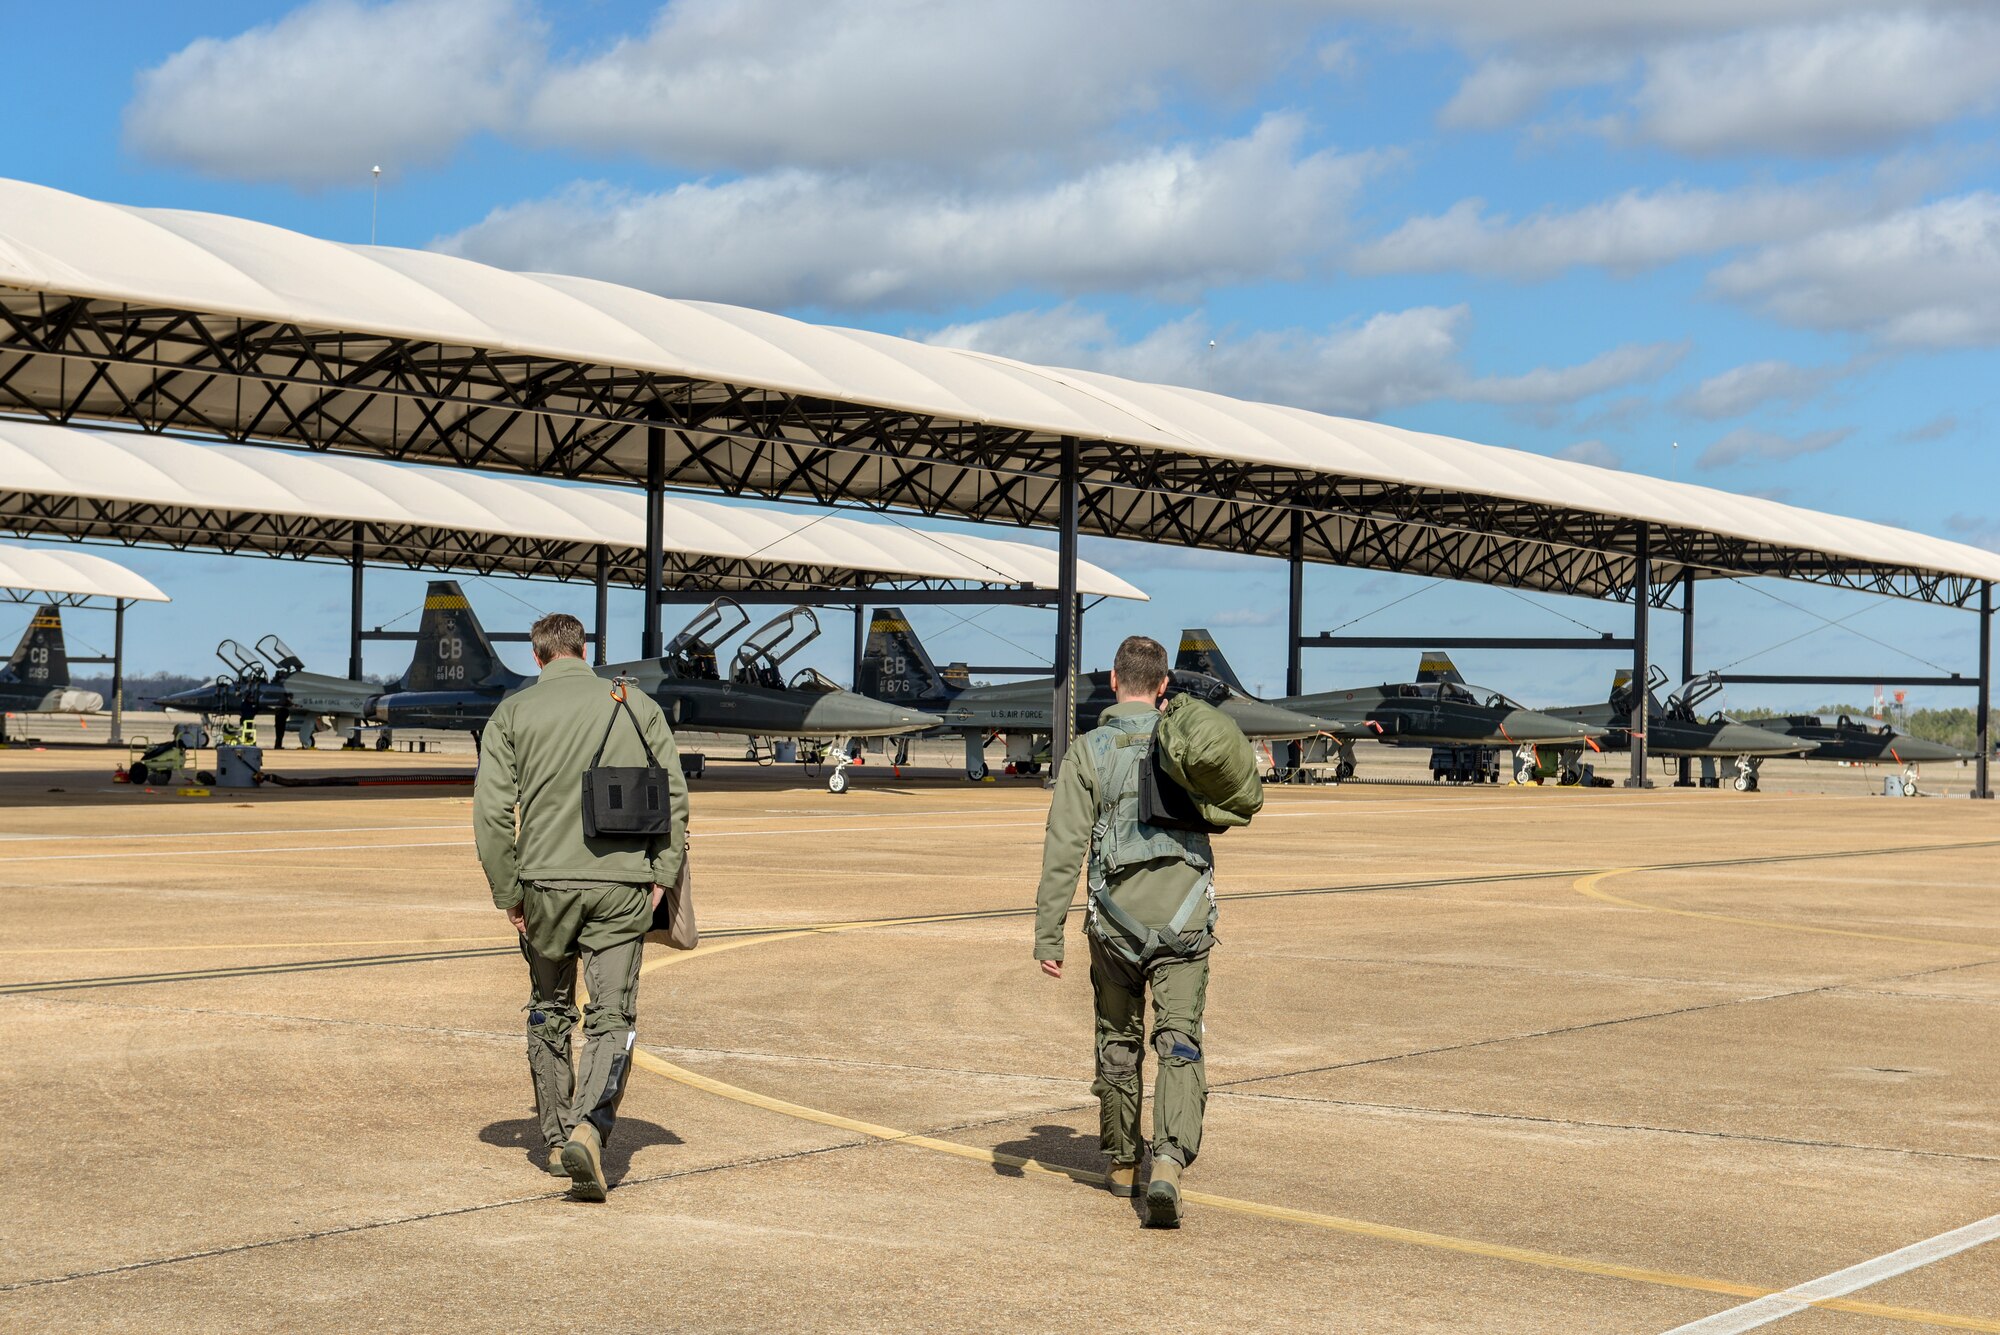 Two pilots from the 49th Fighter Training Squadron walk toward a fleet of T-38 Talons Feb. 7, 2020, at Columbus Air Force Base, Miss. The pilots were participants in exercise Southern Strike, a joint force exercise hosted by the Mississippi Air National Guard. (U.S. Air Force photo by Airman Davis Donaldson)